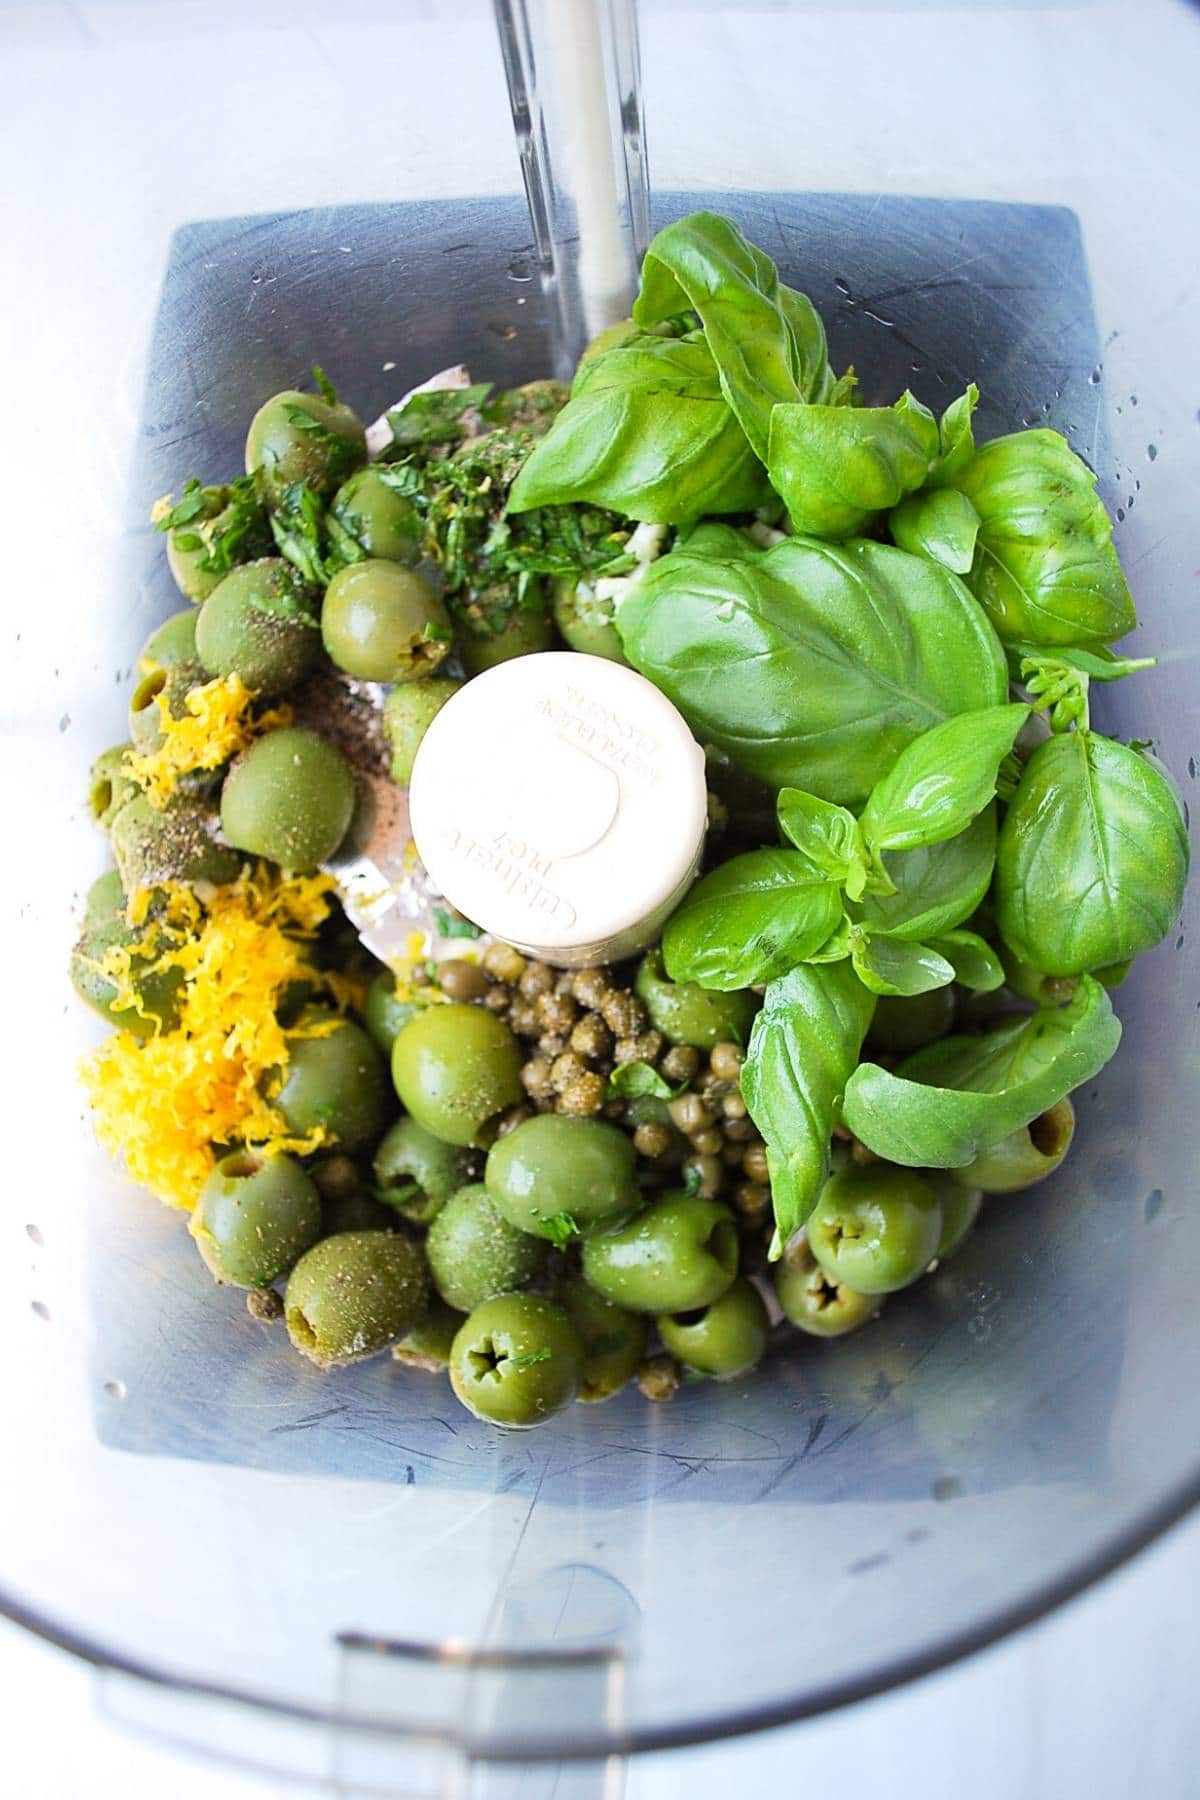 green olive tapenade ingredients in a food processor ready to pulse